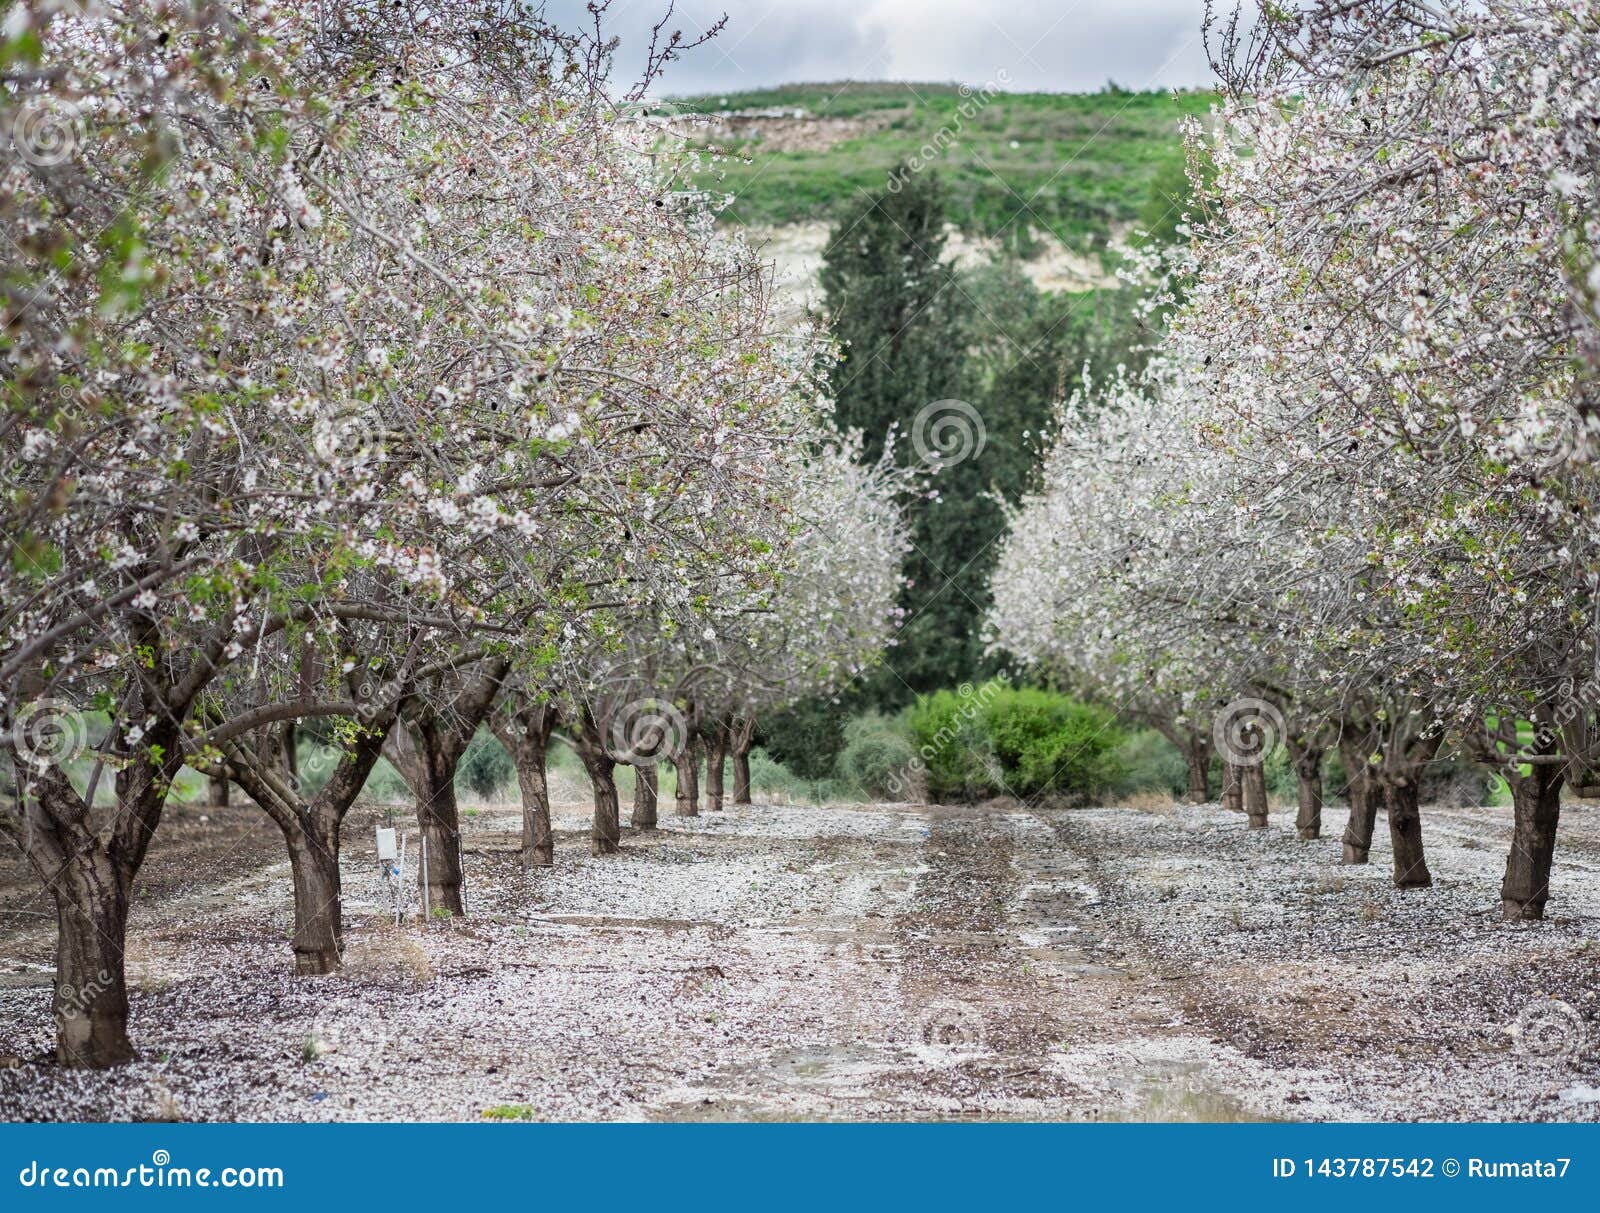 beautiful grove of blooming almond trees at rainy day